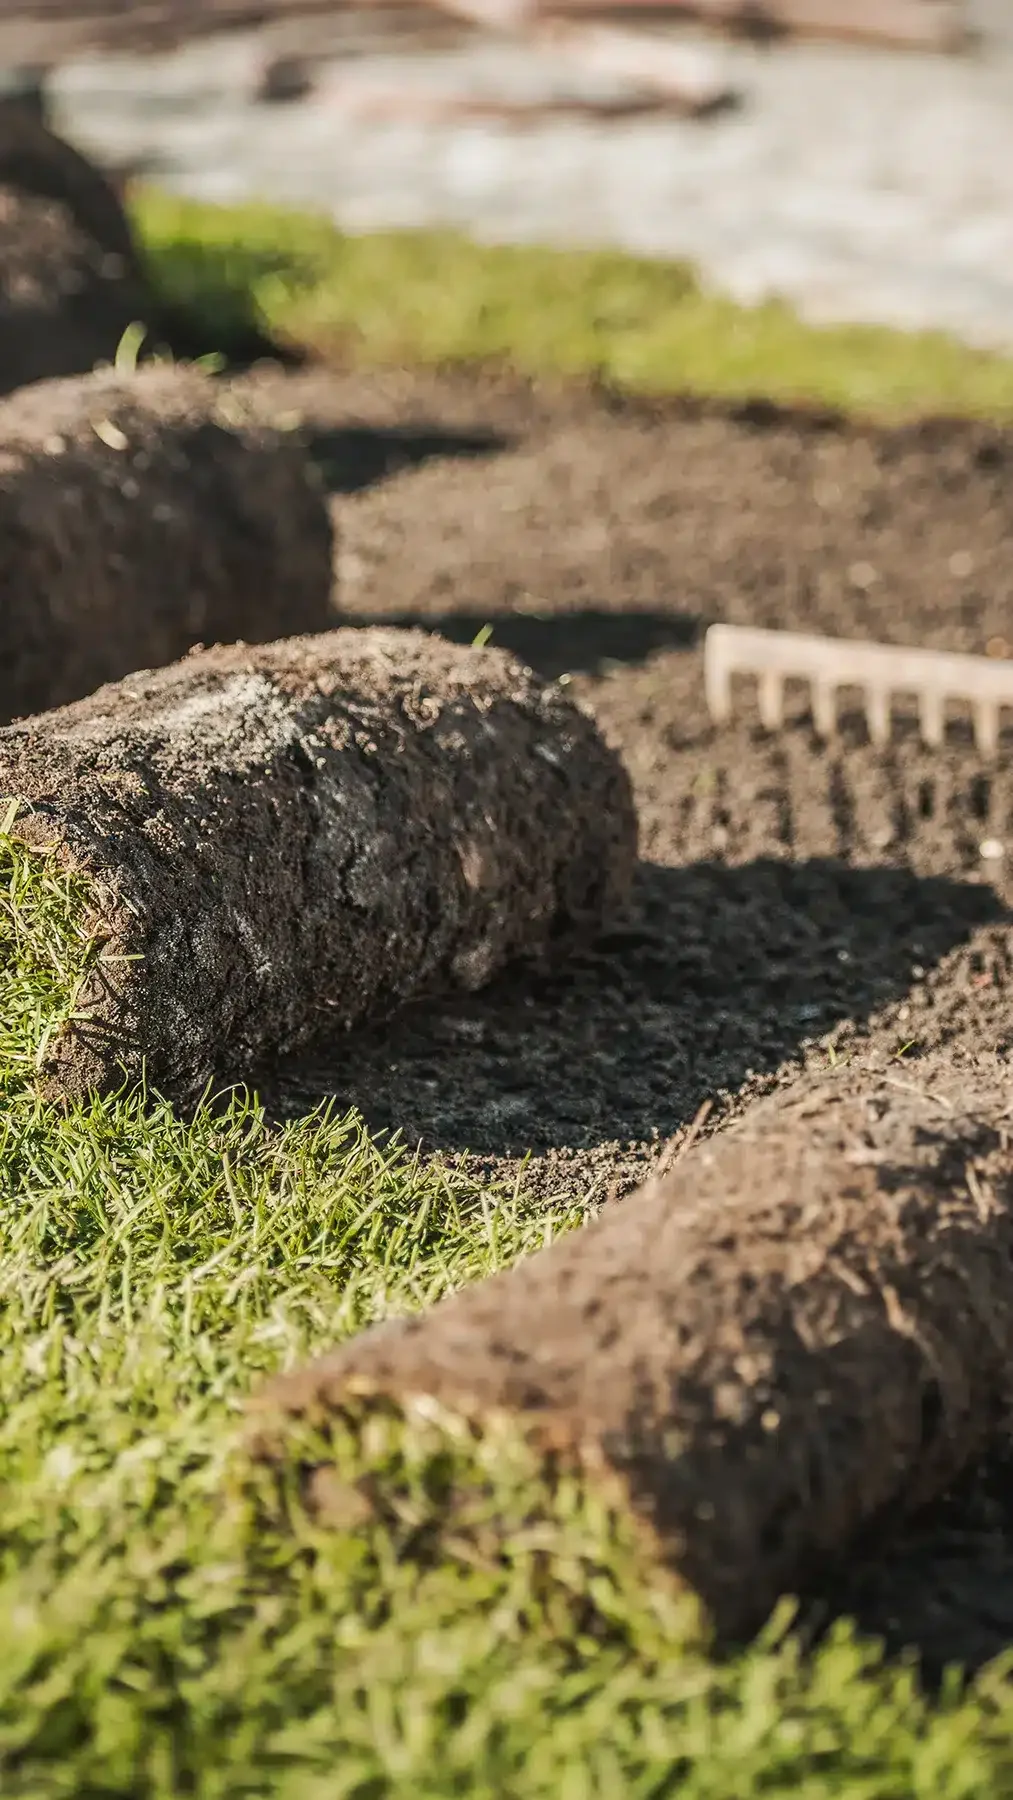 A close-up view of a rolled-up piece of sod being laid on a prepared soil bed. A garden rake is visible in the background, indicating ongoing lawn repair or installation work. The fresh, green grass contrasts with the dark soil, highlighting the process of establishing a new lawn.